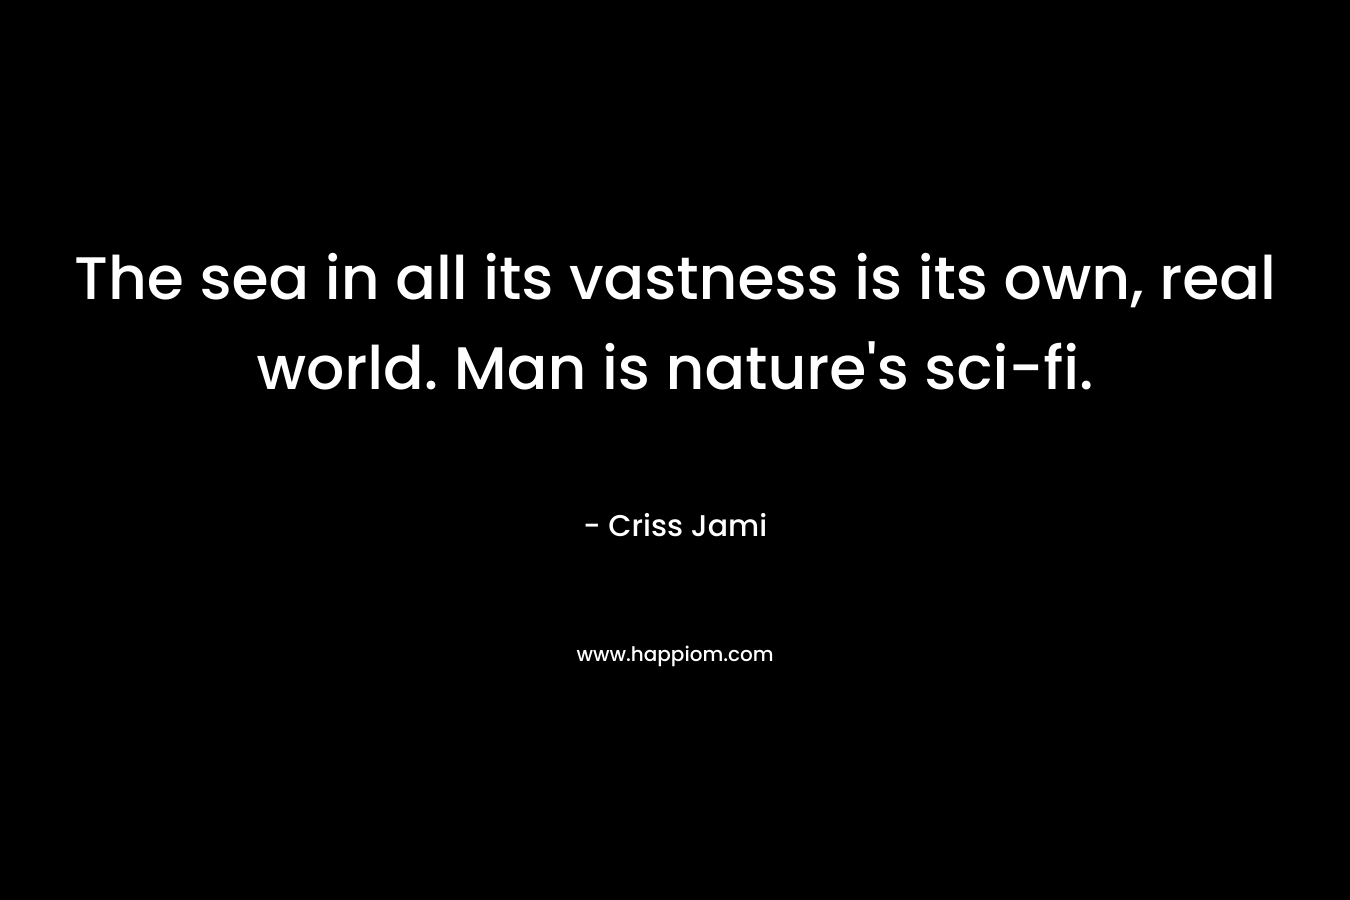 The sea in all its vastness is its own, real world. Man is nature’s sci-fi. – Criss Jami